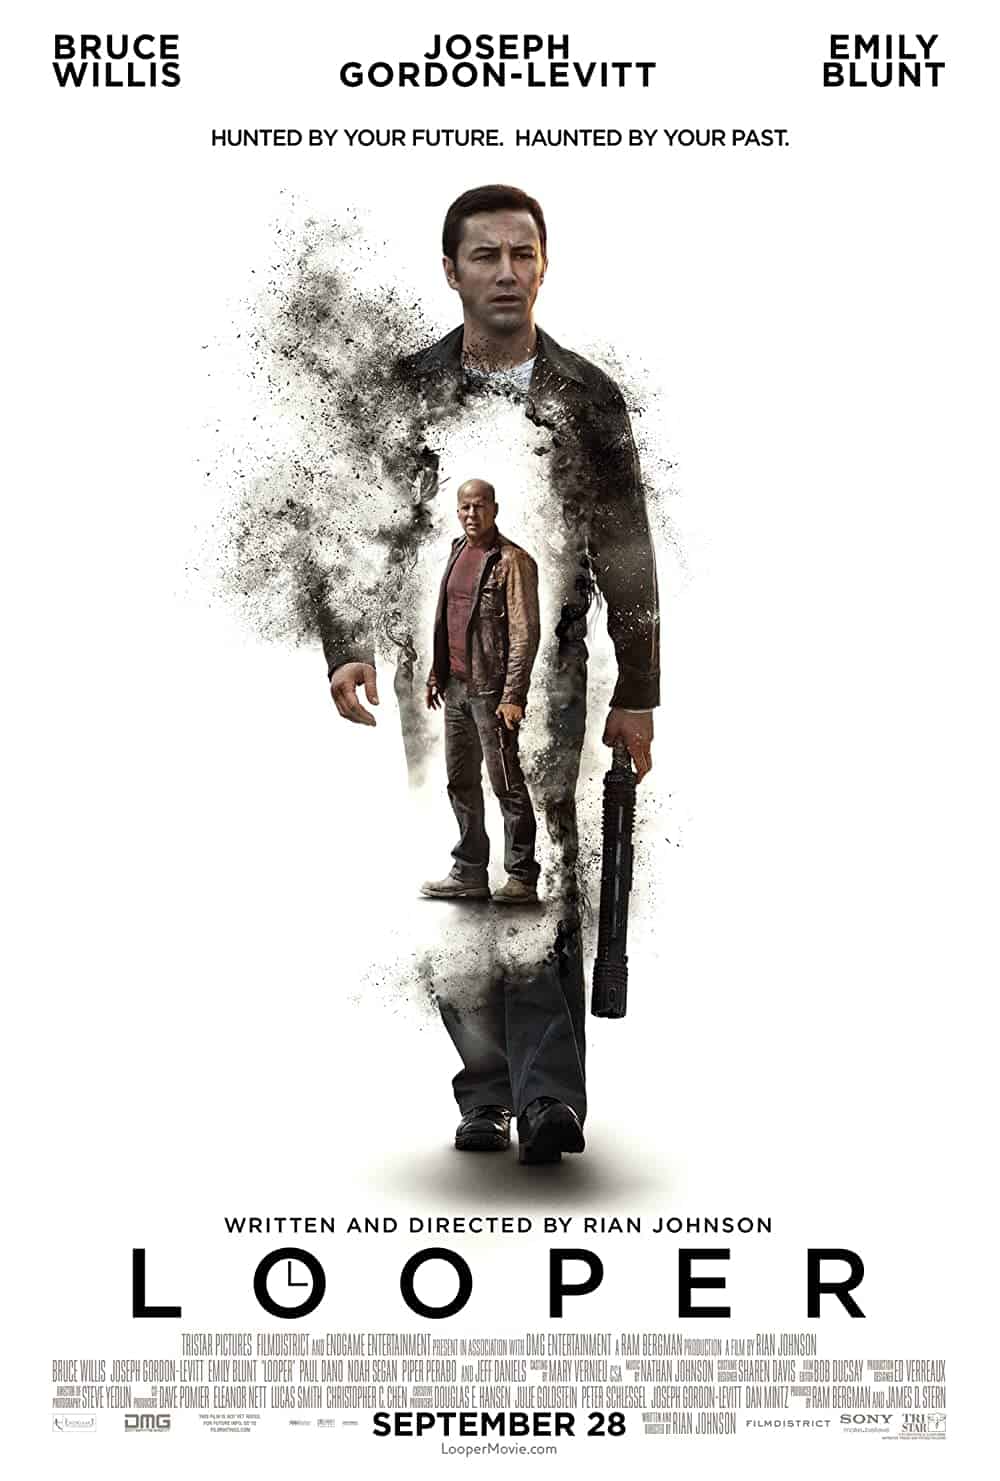 Looper (2012) Best Time Loop Movies To Check Out